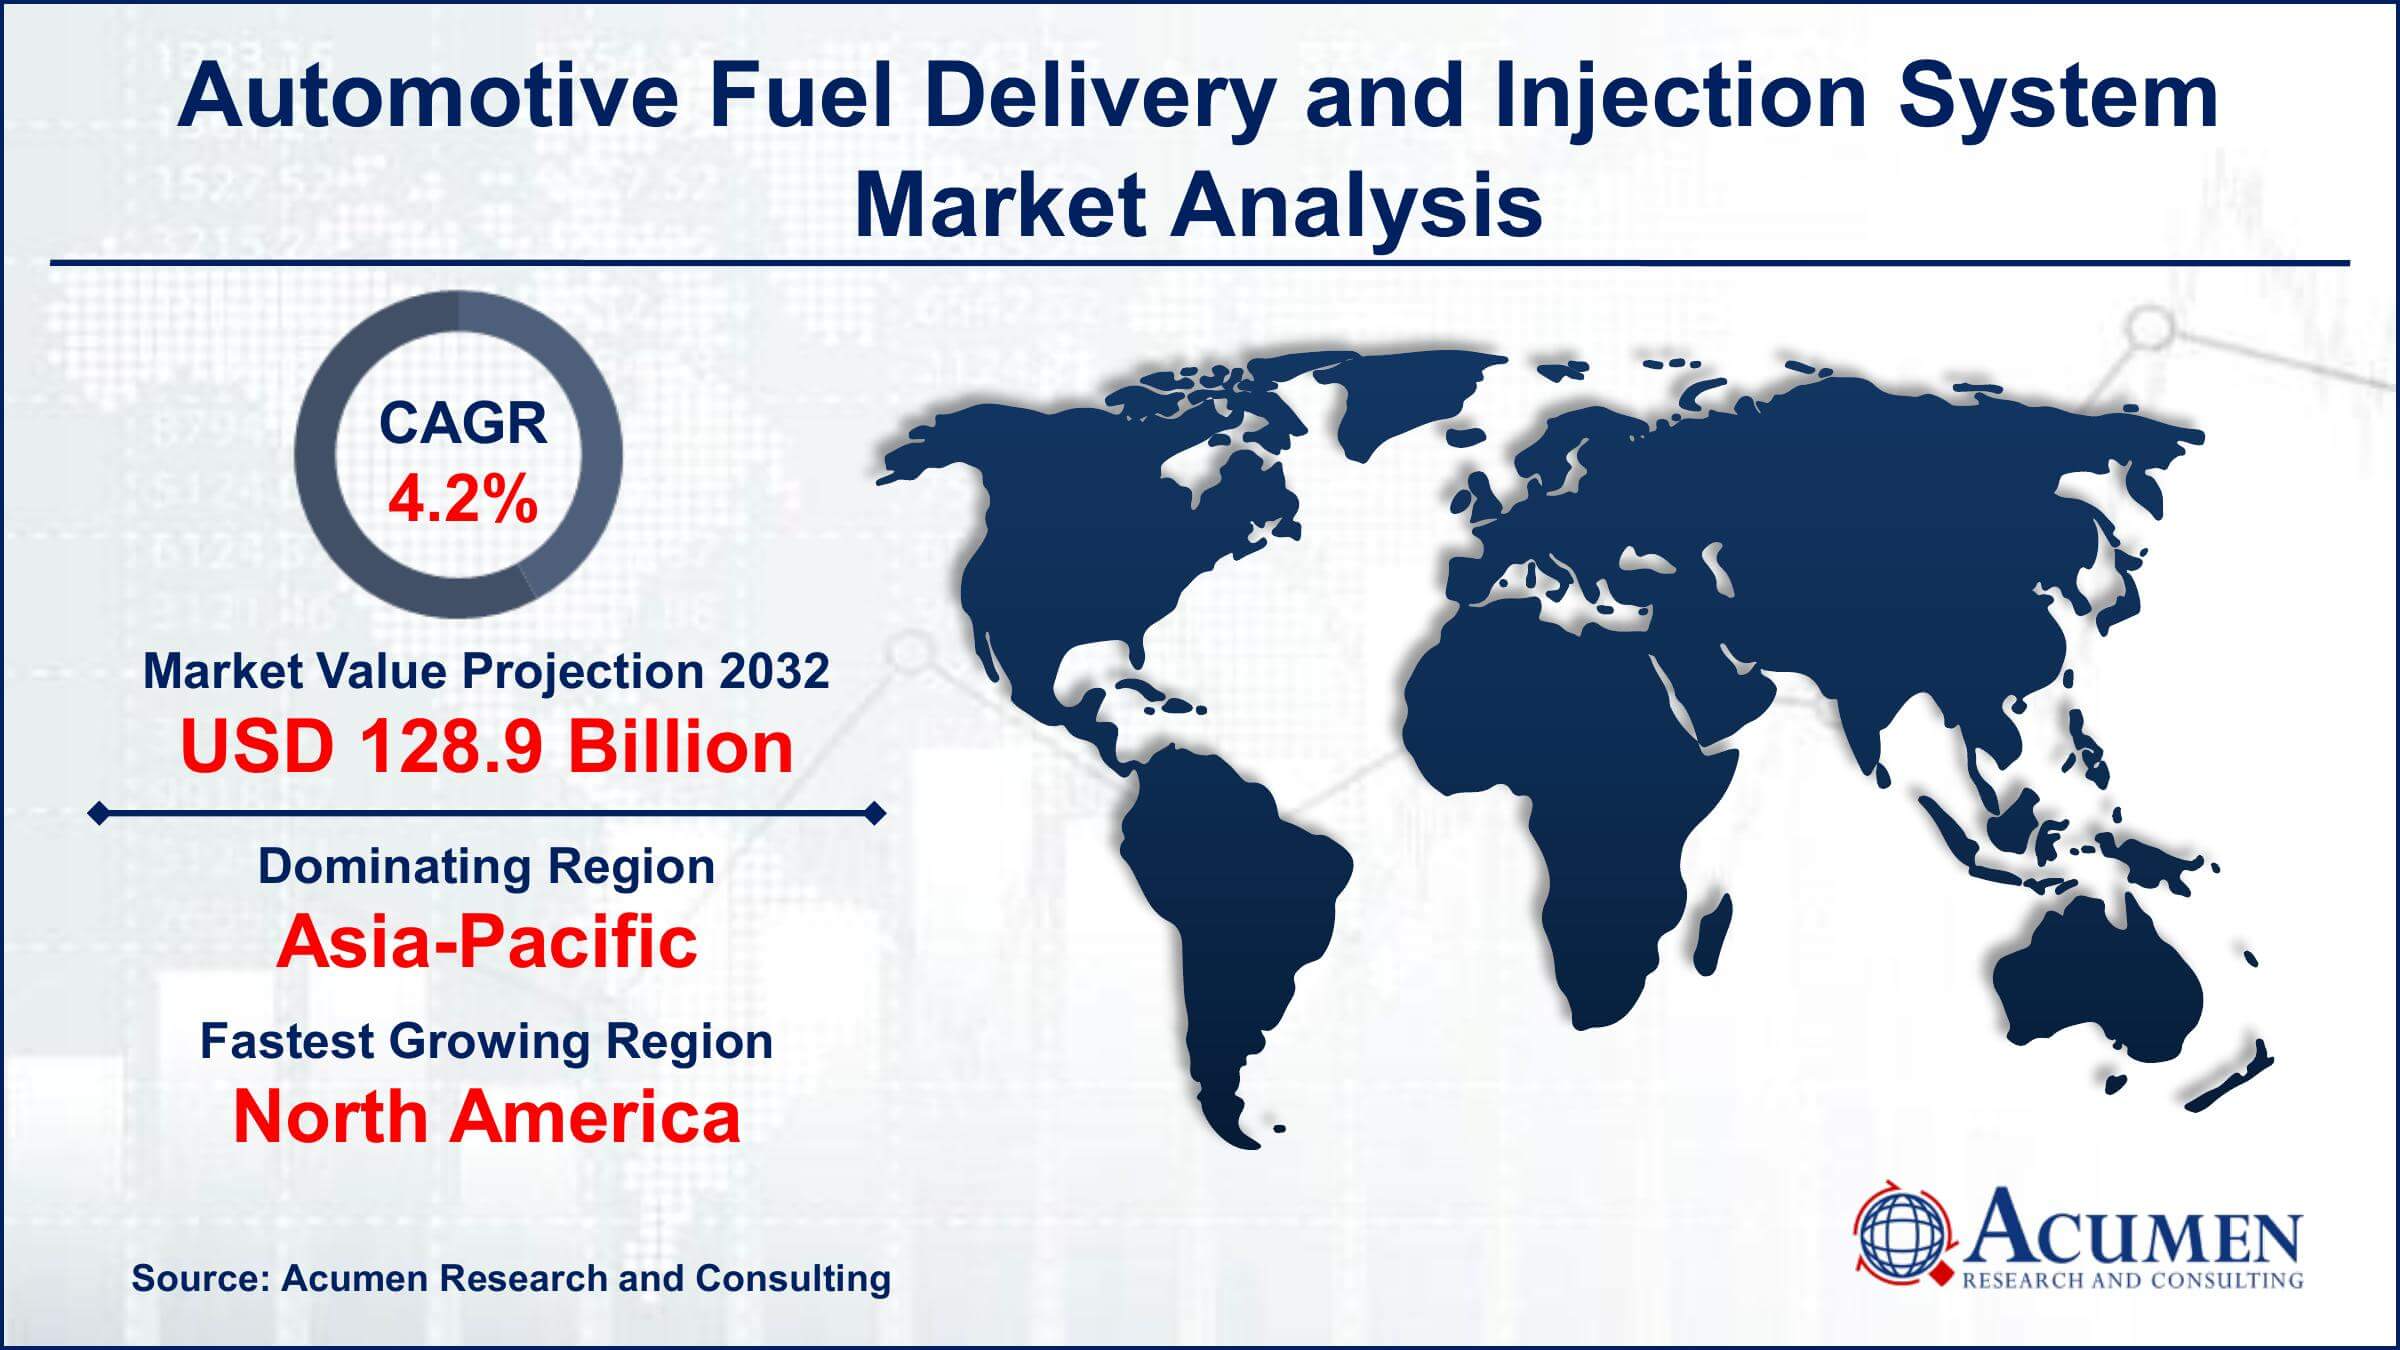 Global Automotive Fuel Delivery and Injection System Market Trends